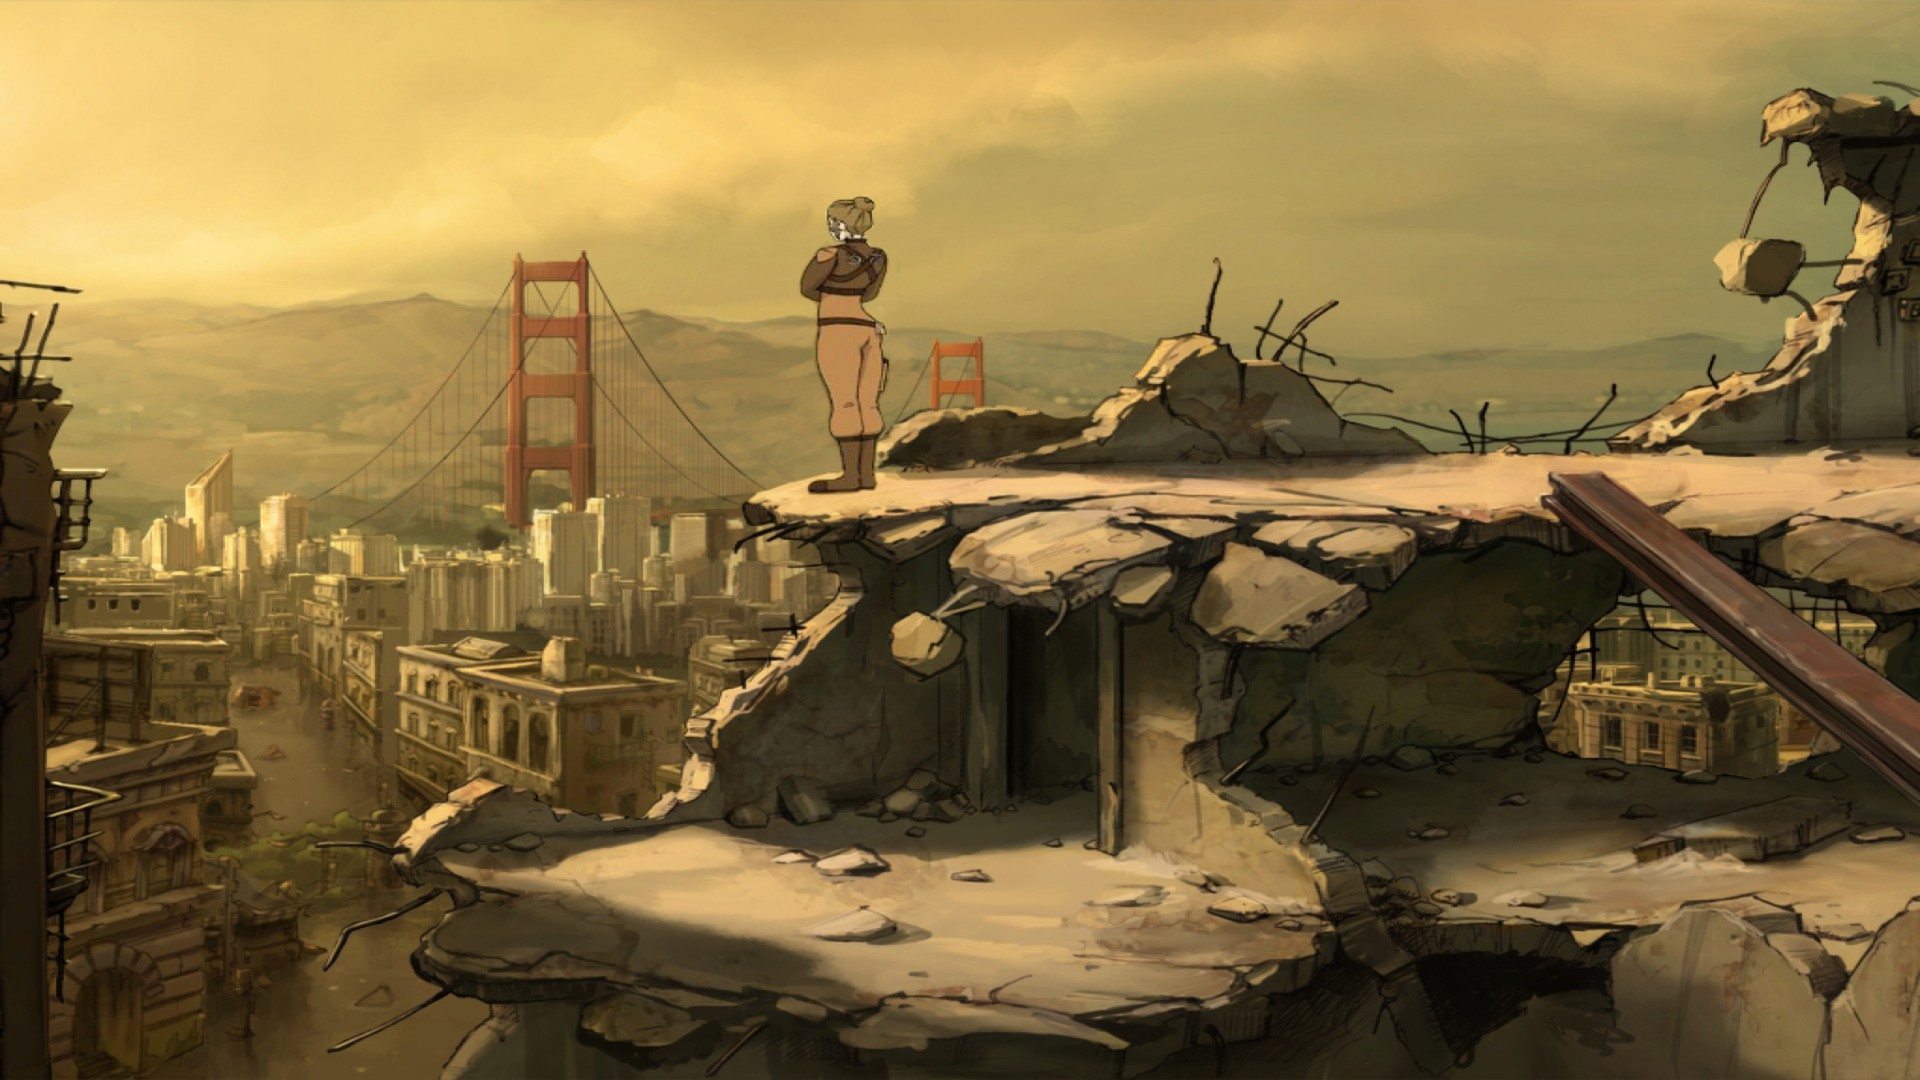 A femme appearing person in military attire stands in the foreground and looks out at a destroyed city, including the Golden Gate Bridge.